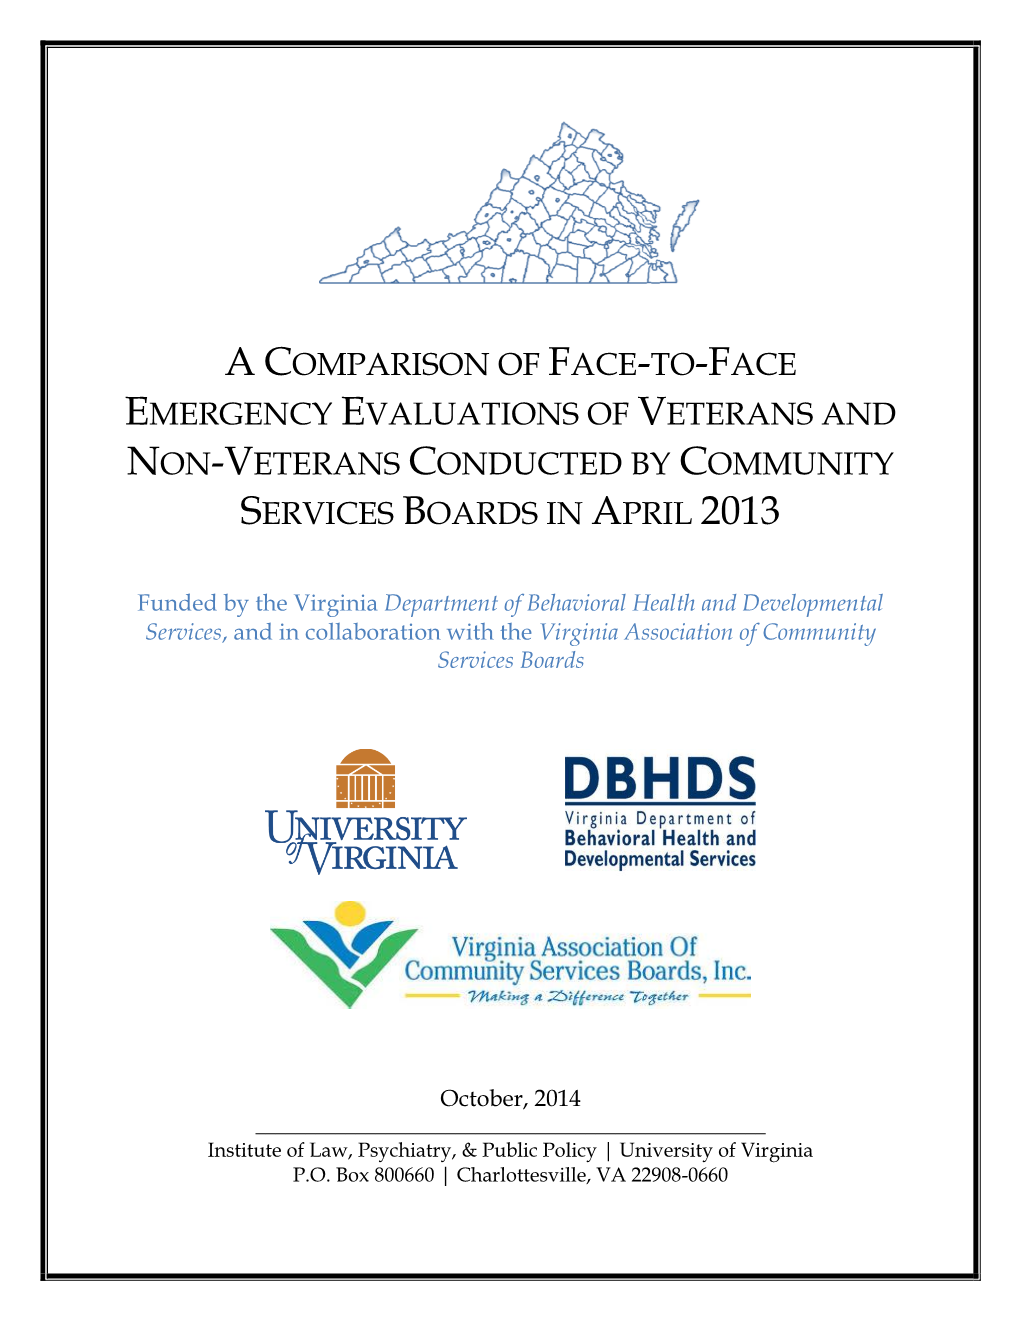 A Comparison of Face-To-Face Emergency Evaluations of Veterans and Non-Veterans Conducted by Community Services Boards in April 2013